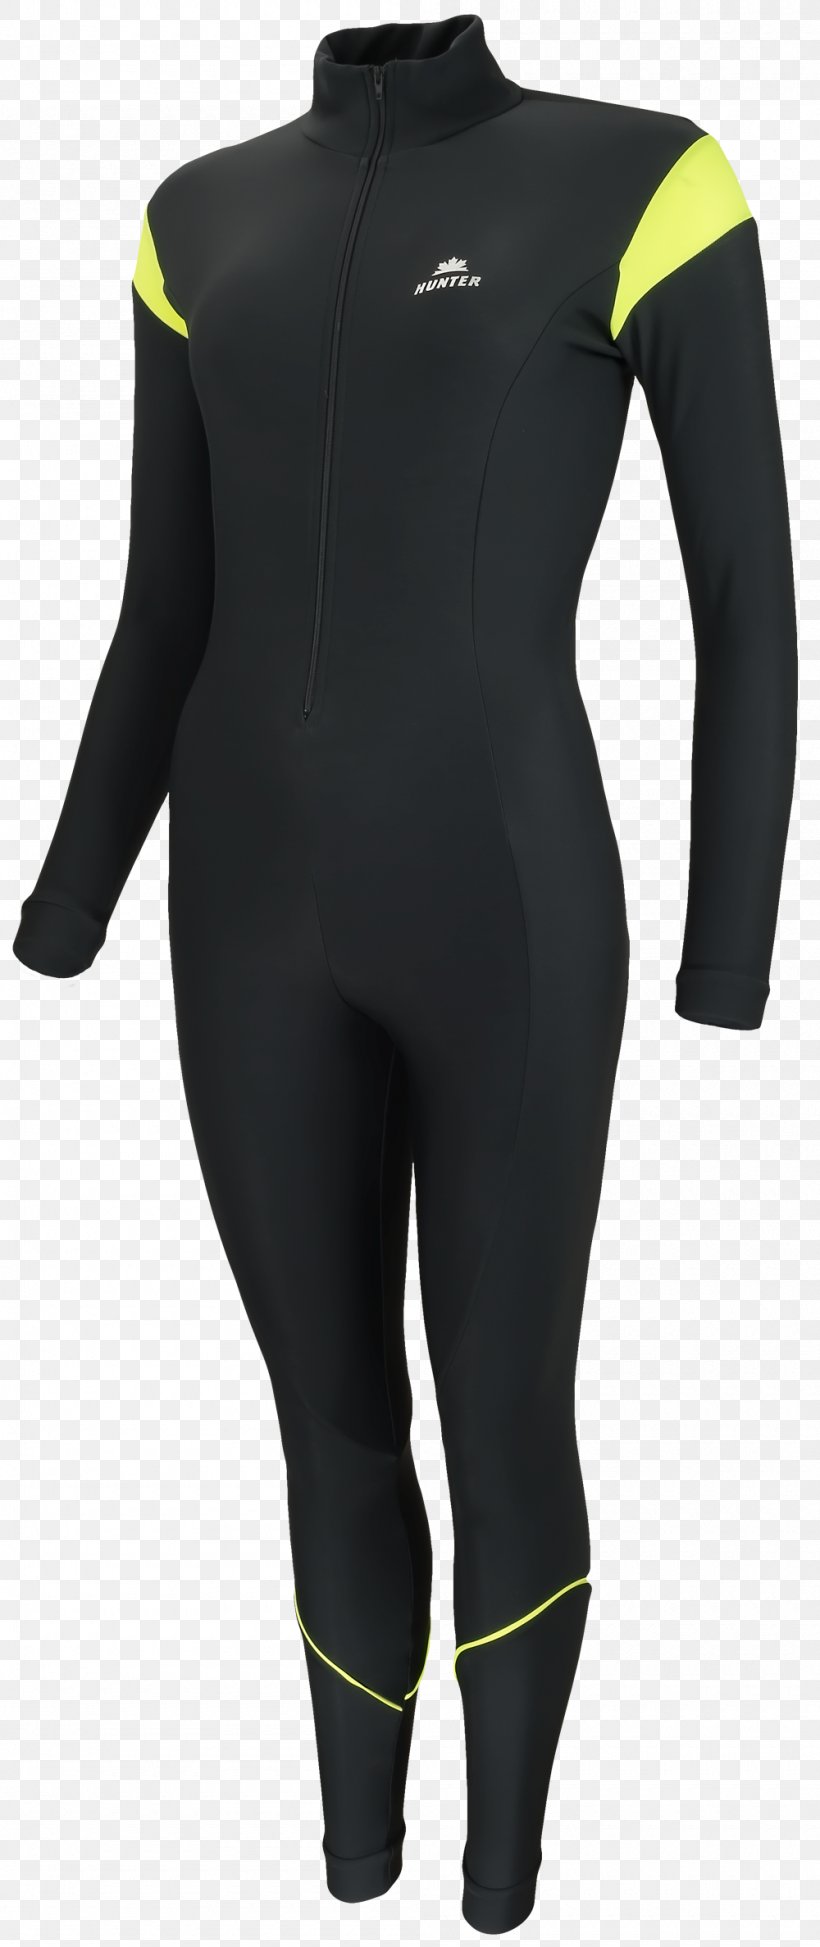 Wetsuit Zip Sola France, PNG, 1000x2375px, Wetsuit, France, Personal Protective Equipment, Sleeve, Sola Download Free